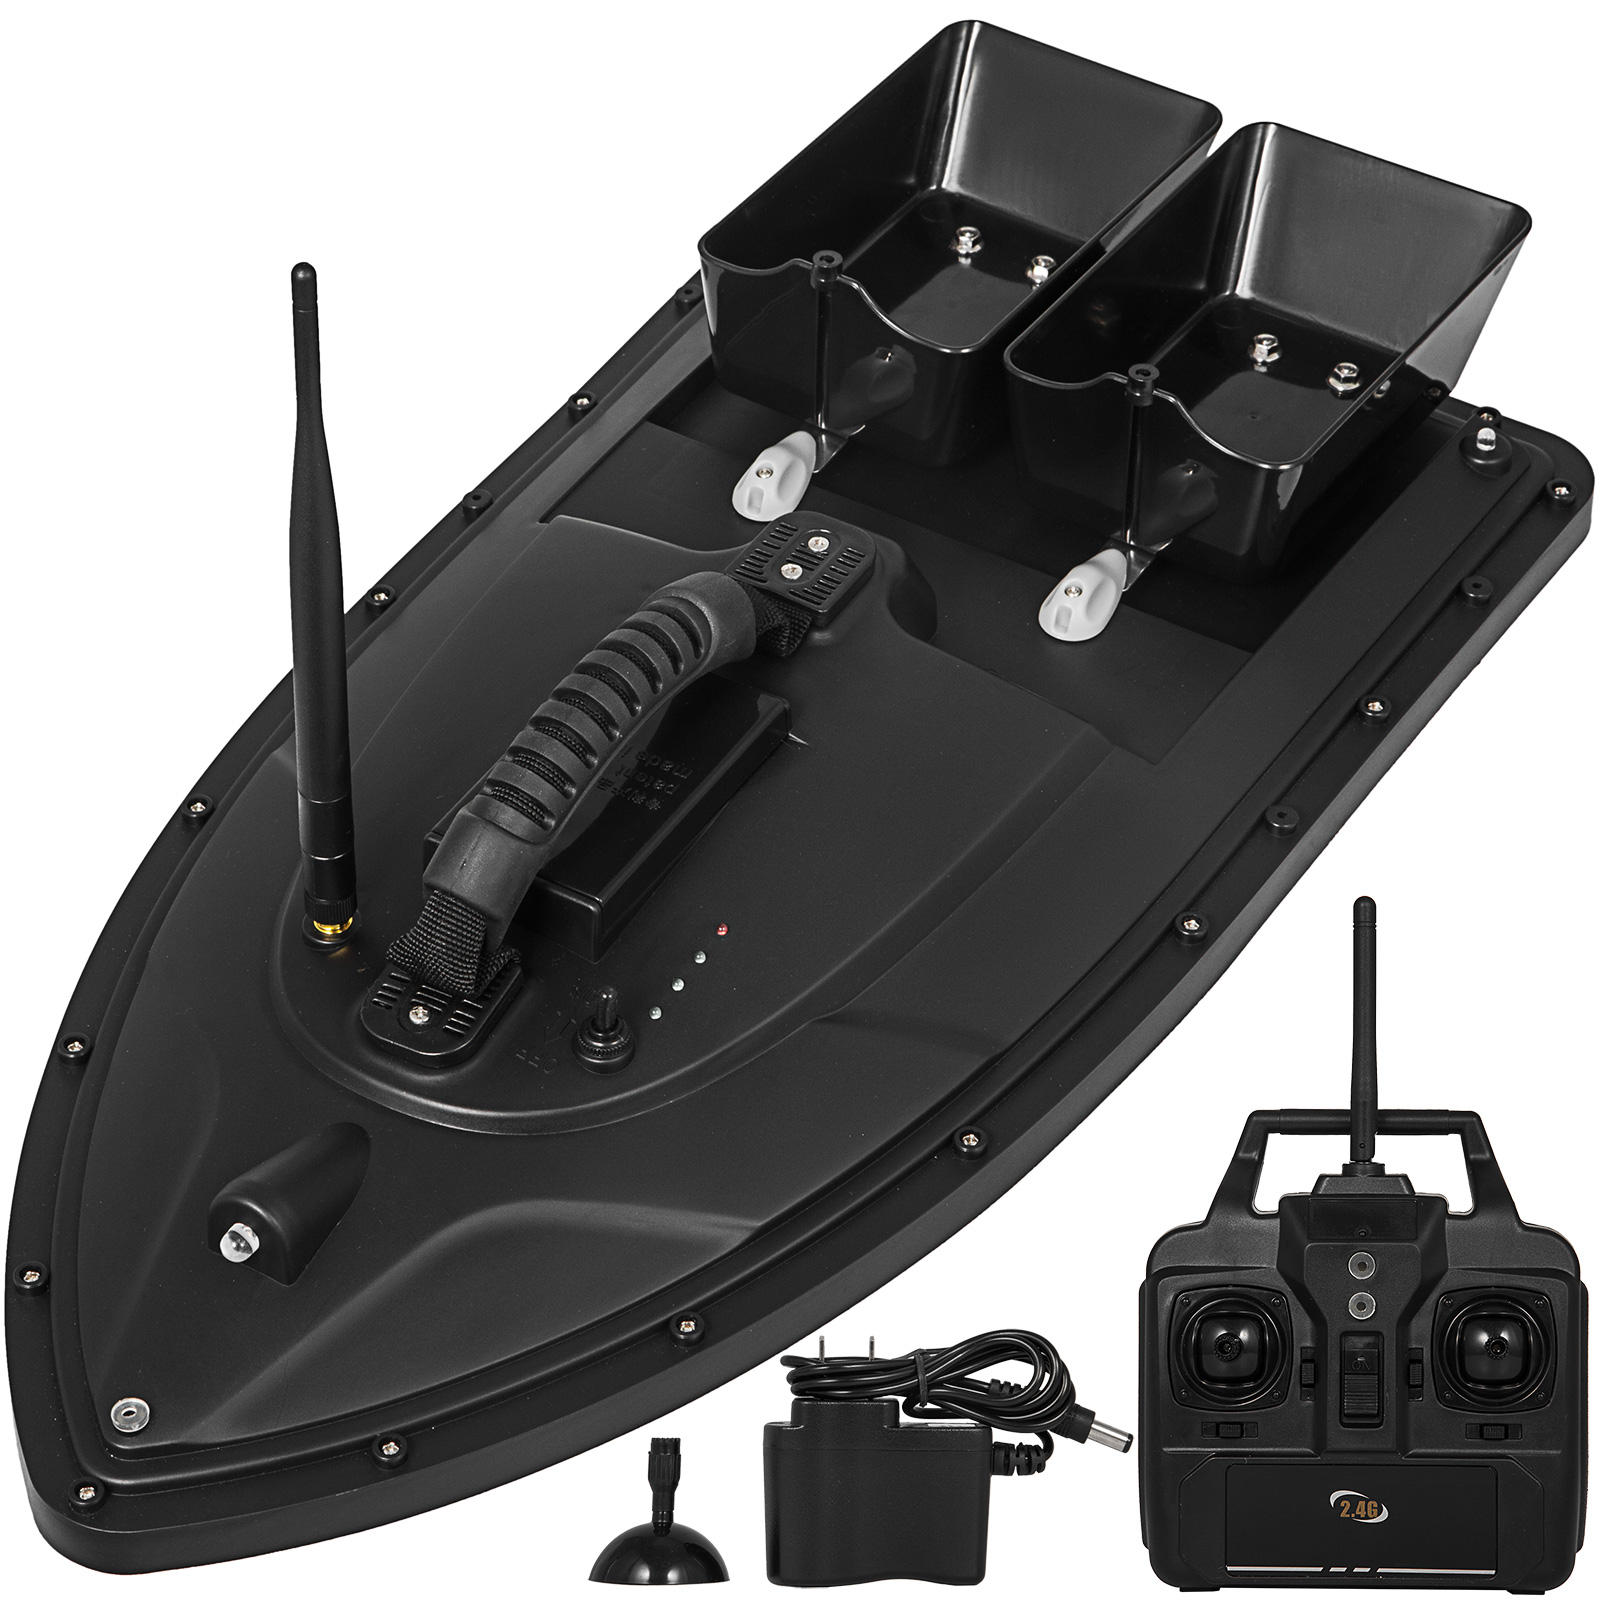 AHWZ RC Boat Fish Finder-Wireless Fishing Lure Bait Boat Fish Finder,Boat with Boat Bag 